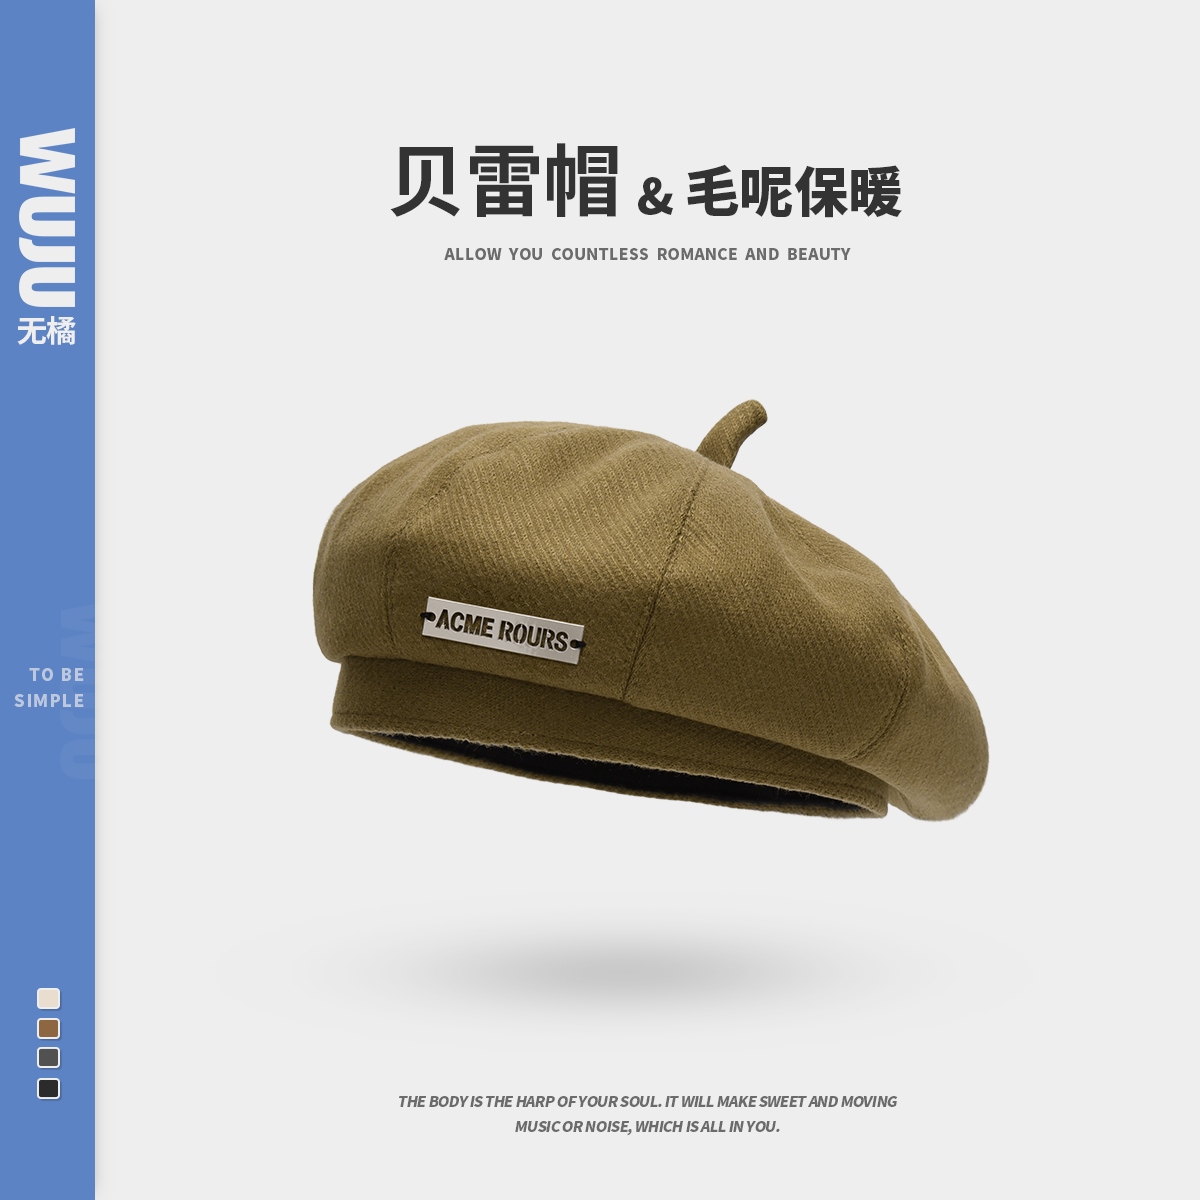 The new 2022 star qiu dong the day brown American newsboy cap restoring